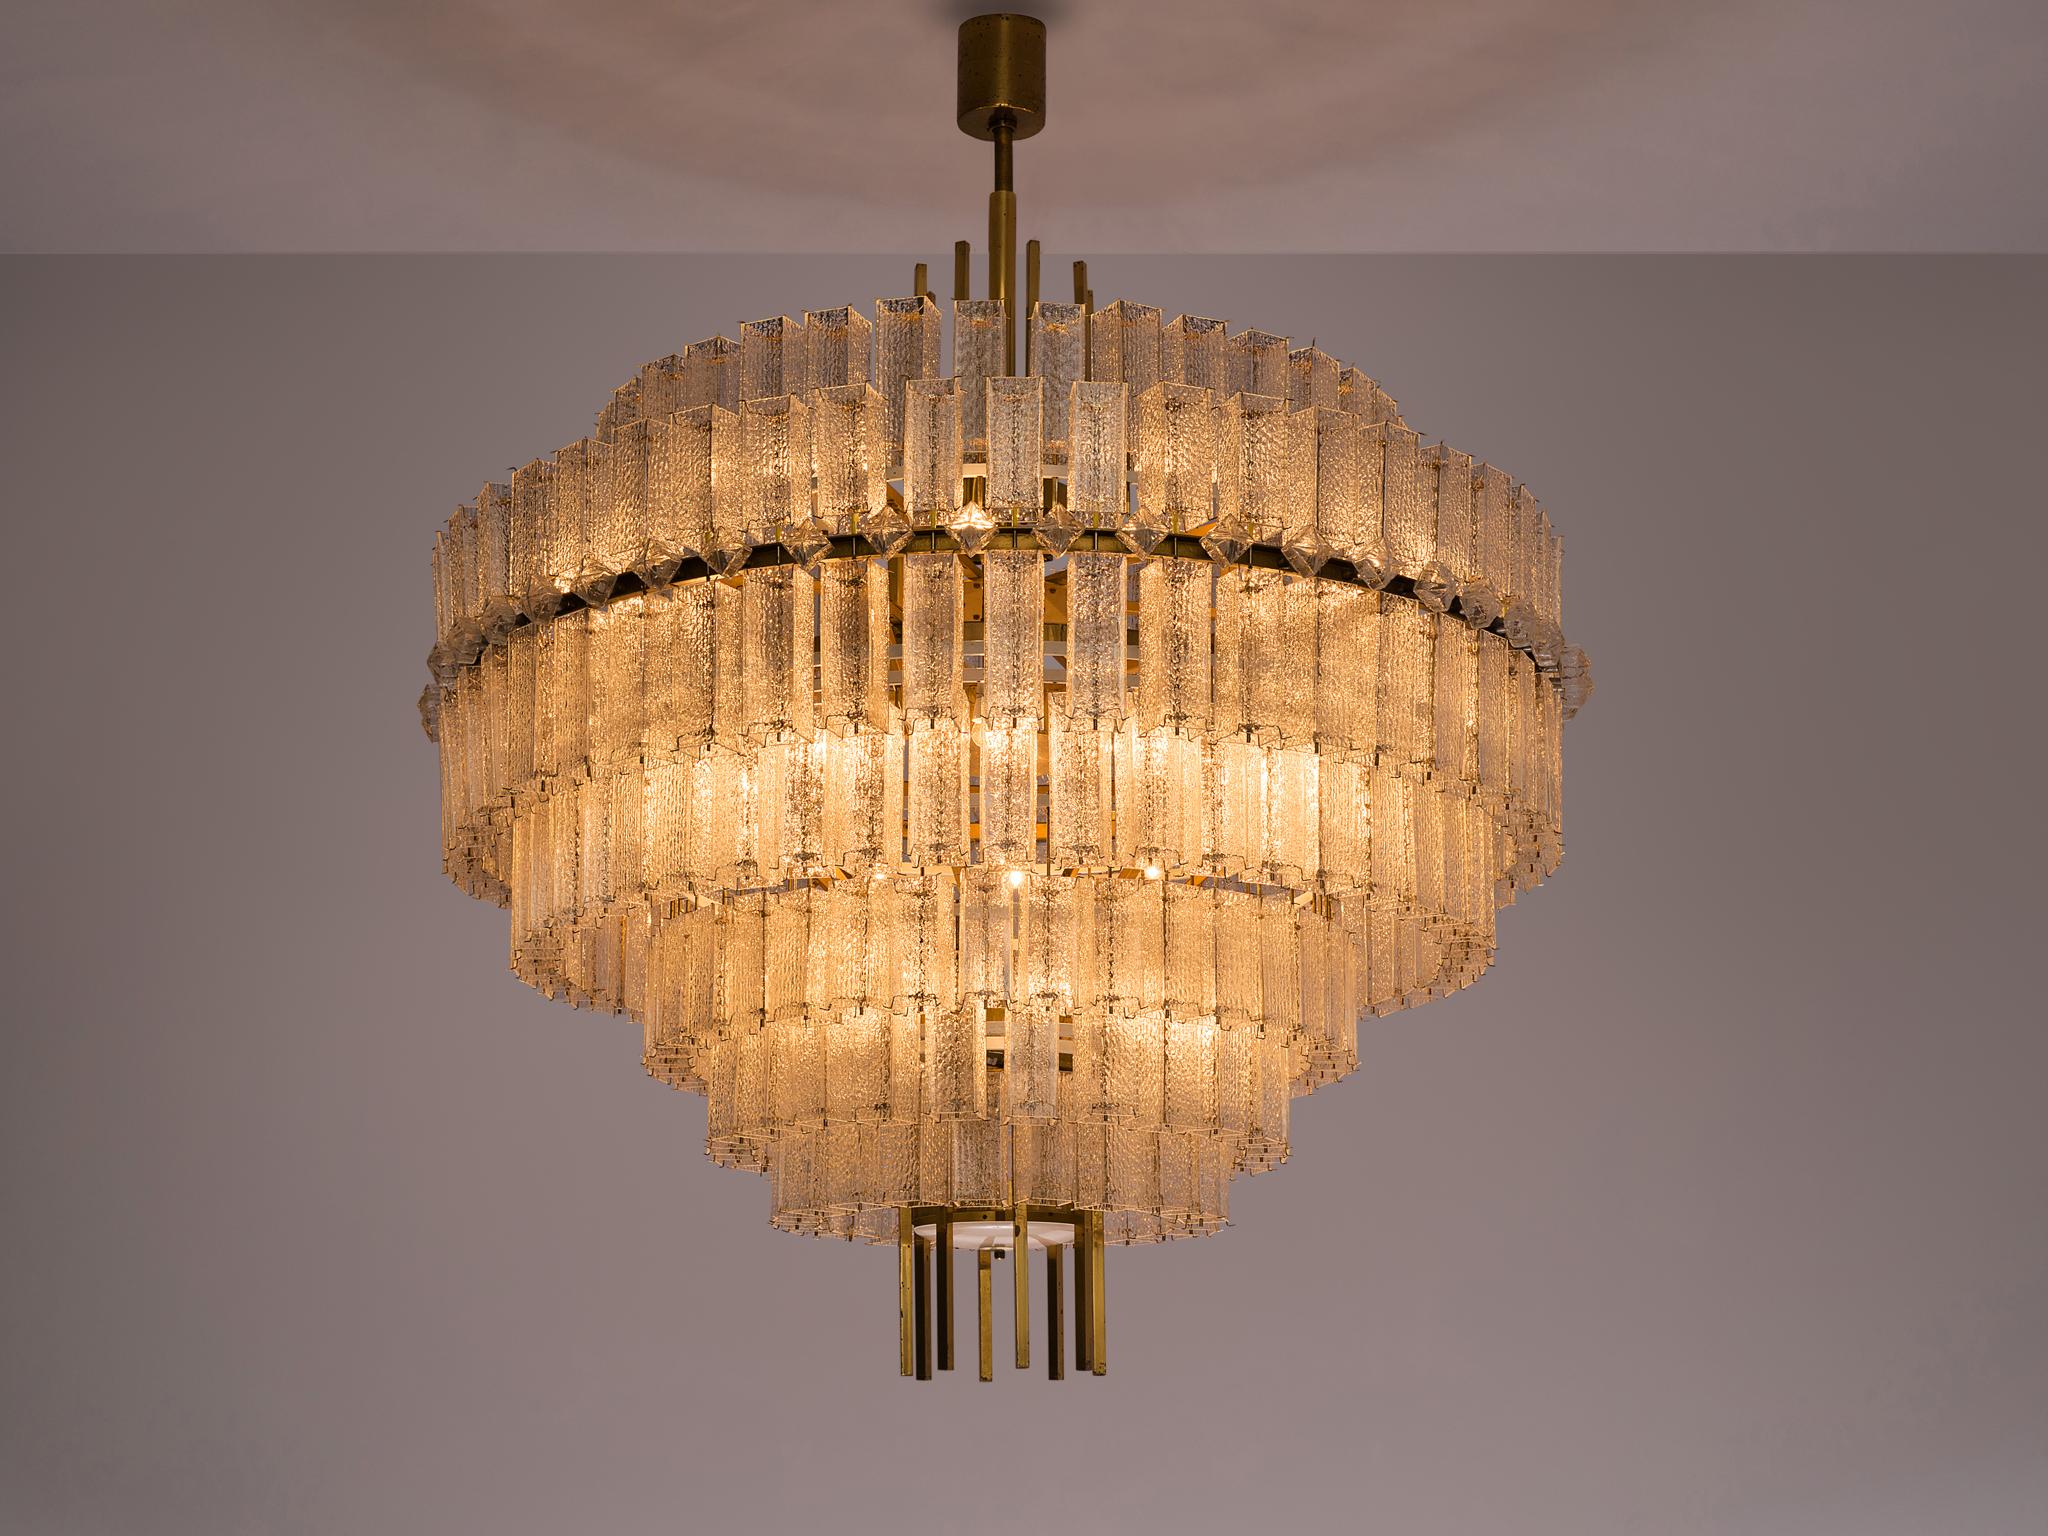 Large chandelier, glass and brass, Europe, 1970s. 

Large circular 200 cm/6.5 ft chandelier with seven layers of glass shades. The frame is made of brass and holds numerous structured glass 'tubes' with a brass centre. Due to the combination of the